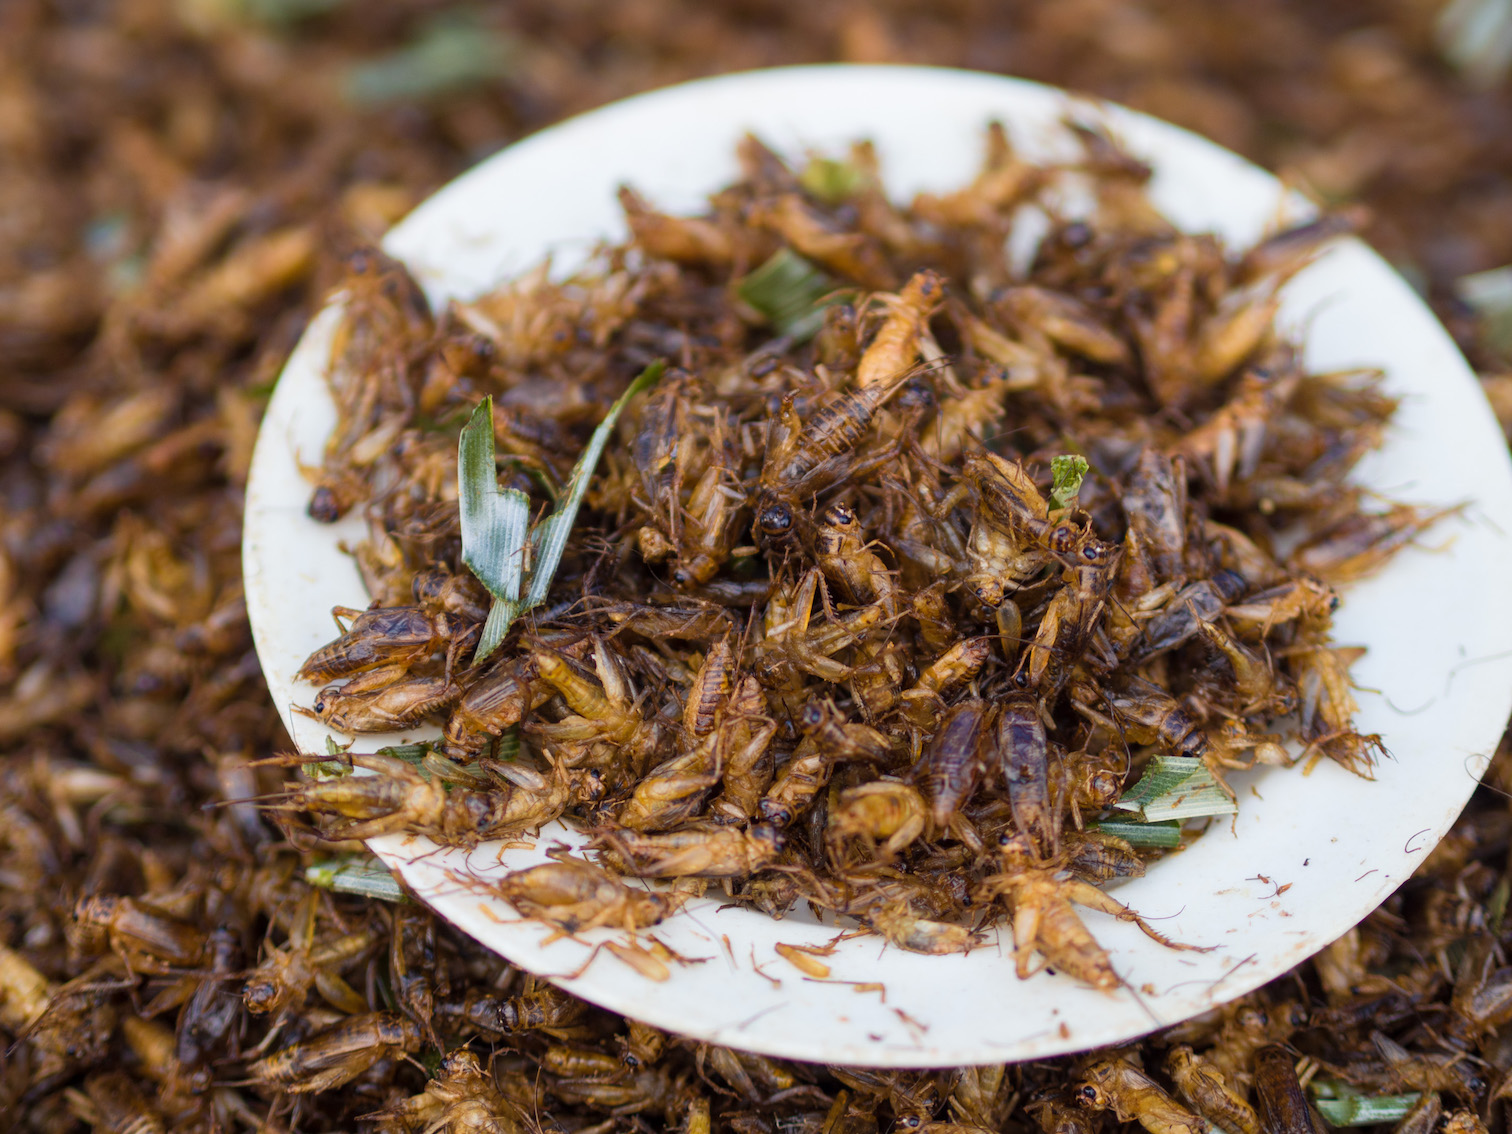 Image: Are insects the solution to solving world hunger?